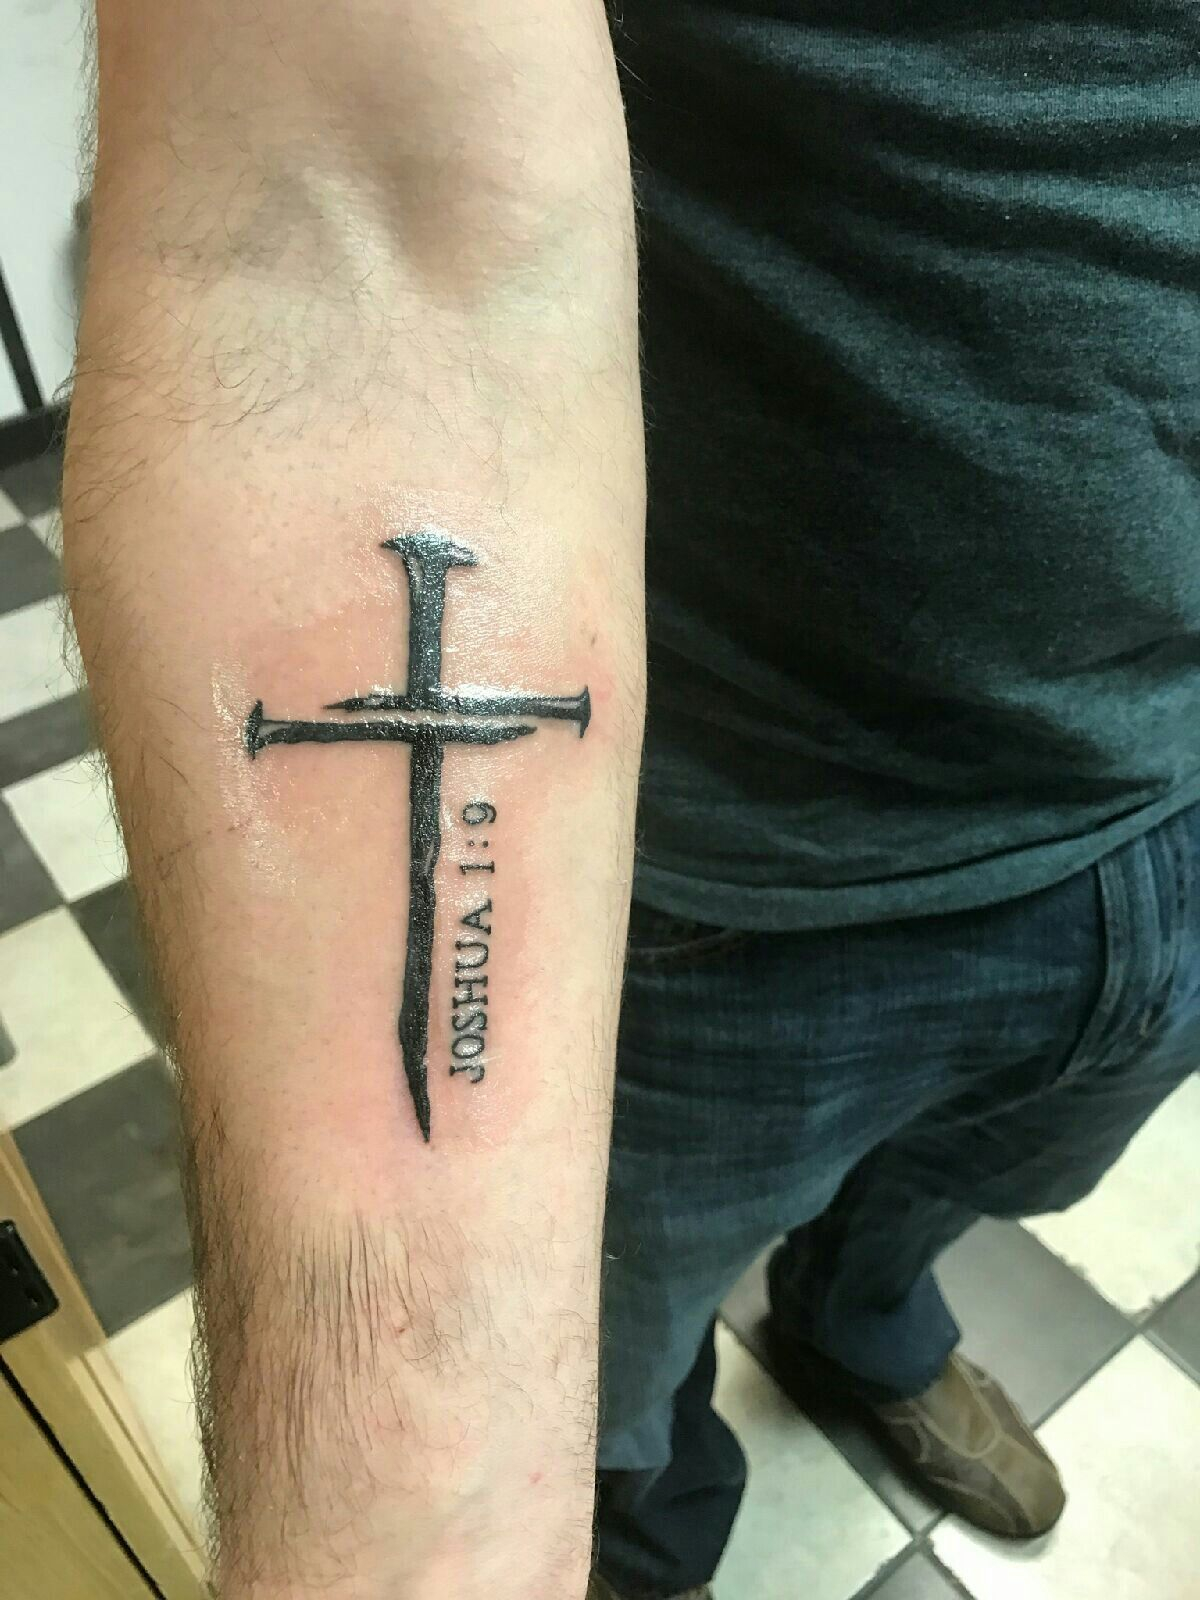 My Nail Cross Tattoo With Joshua 19 Ink Cross Tattoo Designs throughout sizing 1200 X 1600